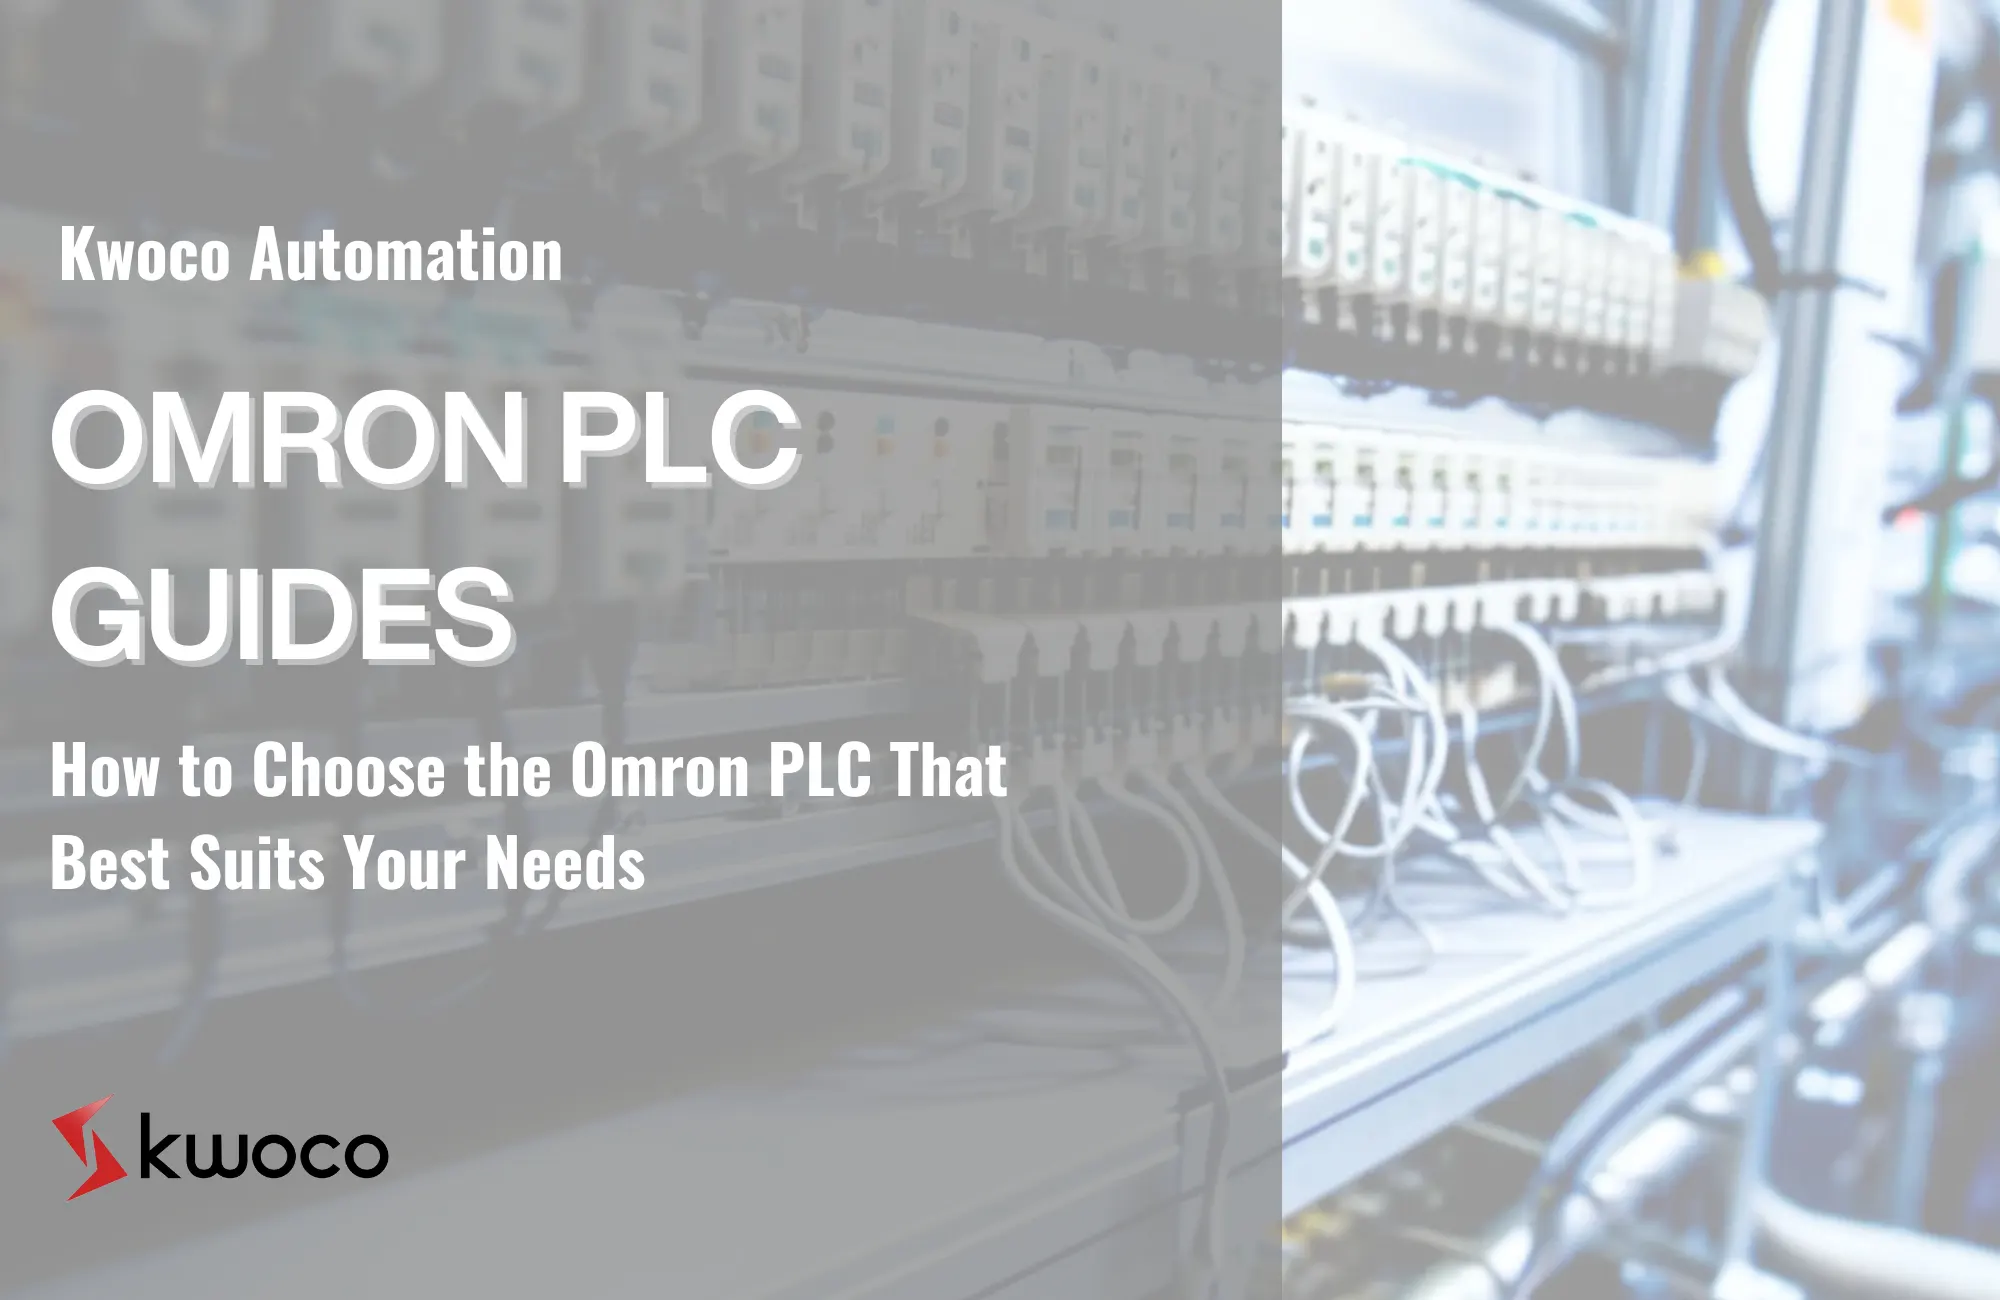 How to Choose the Omron PLC That Best Suits Your Needs